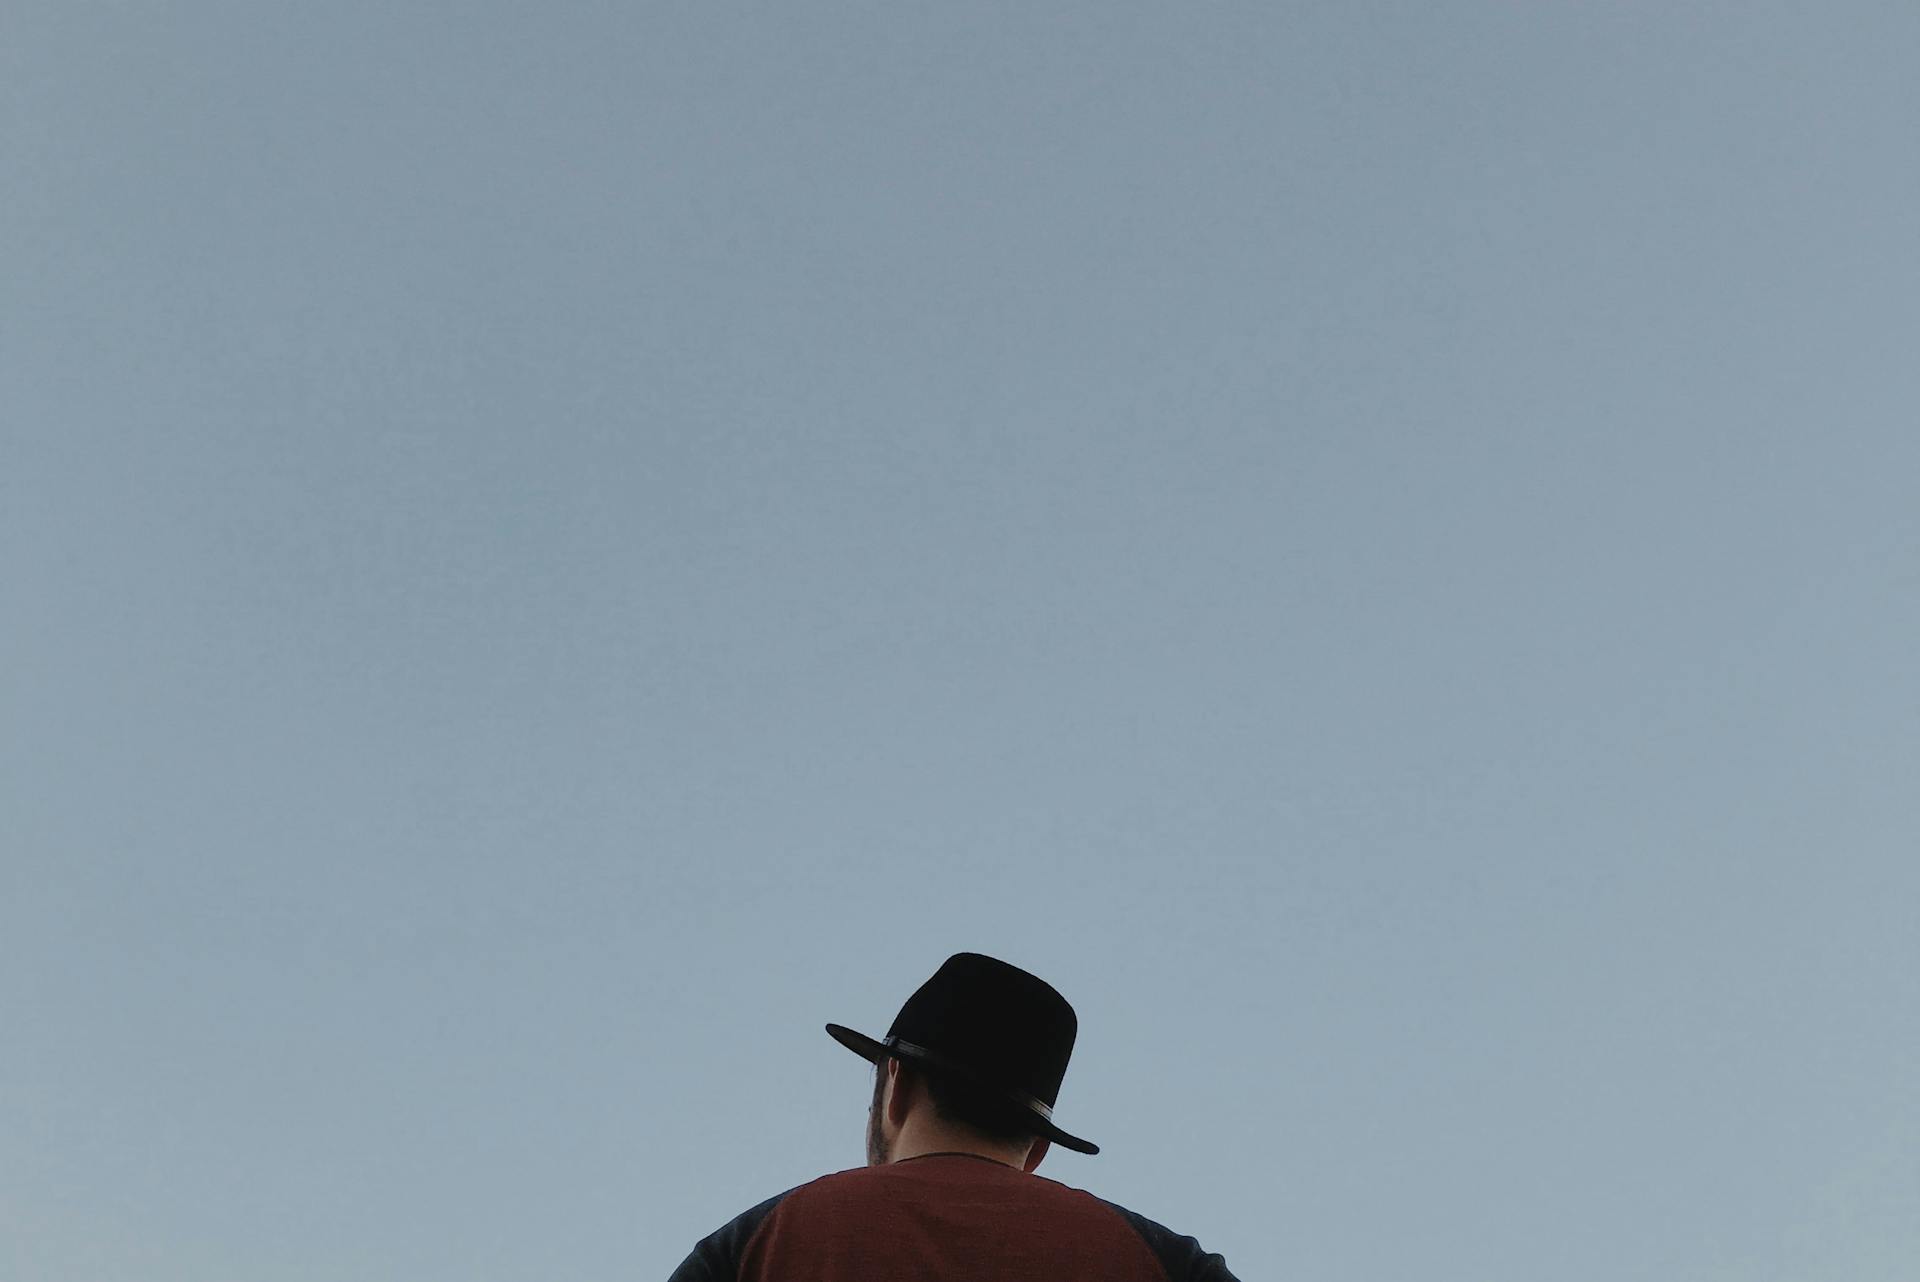 Faceless unshaven man in hat on blue background